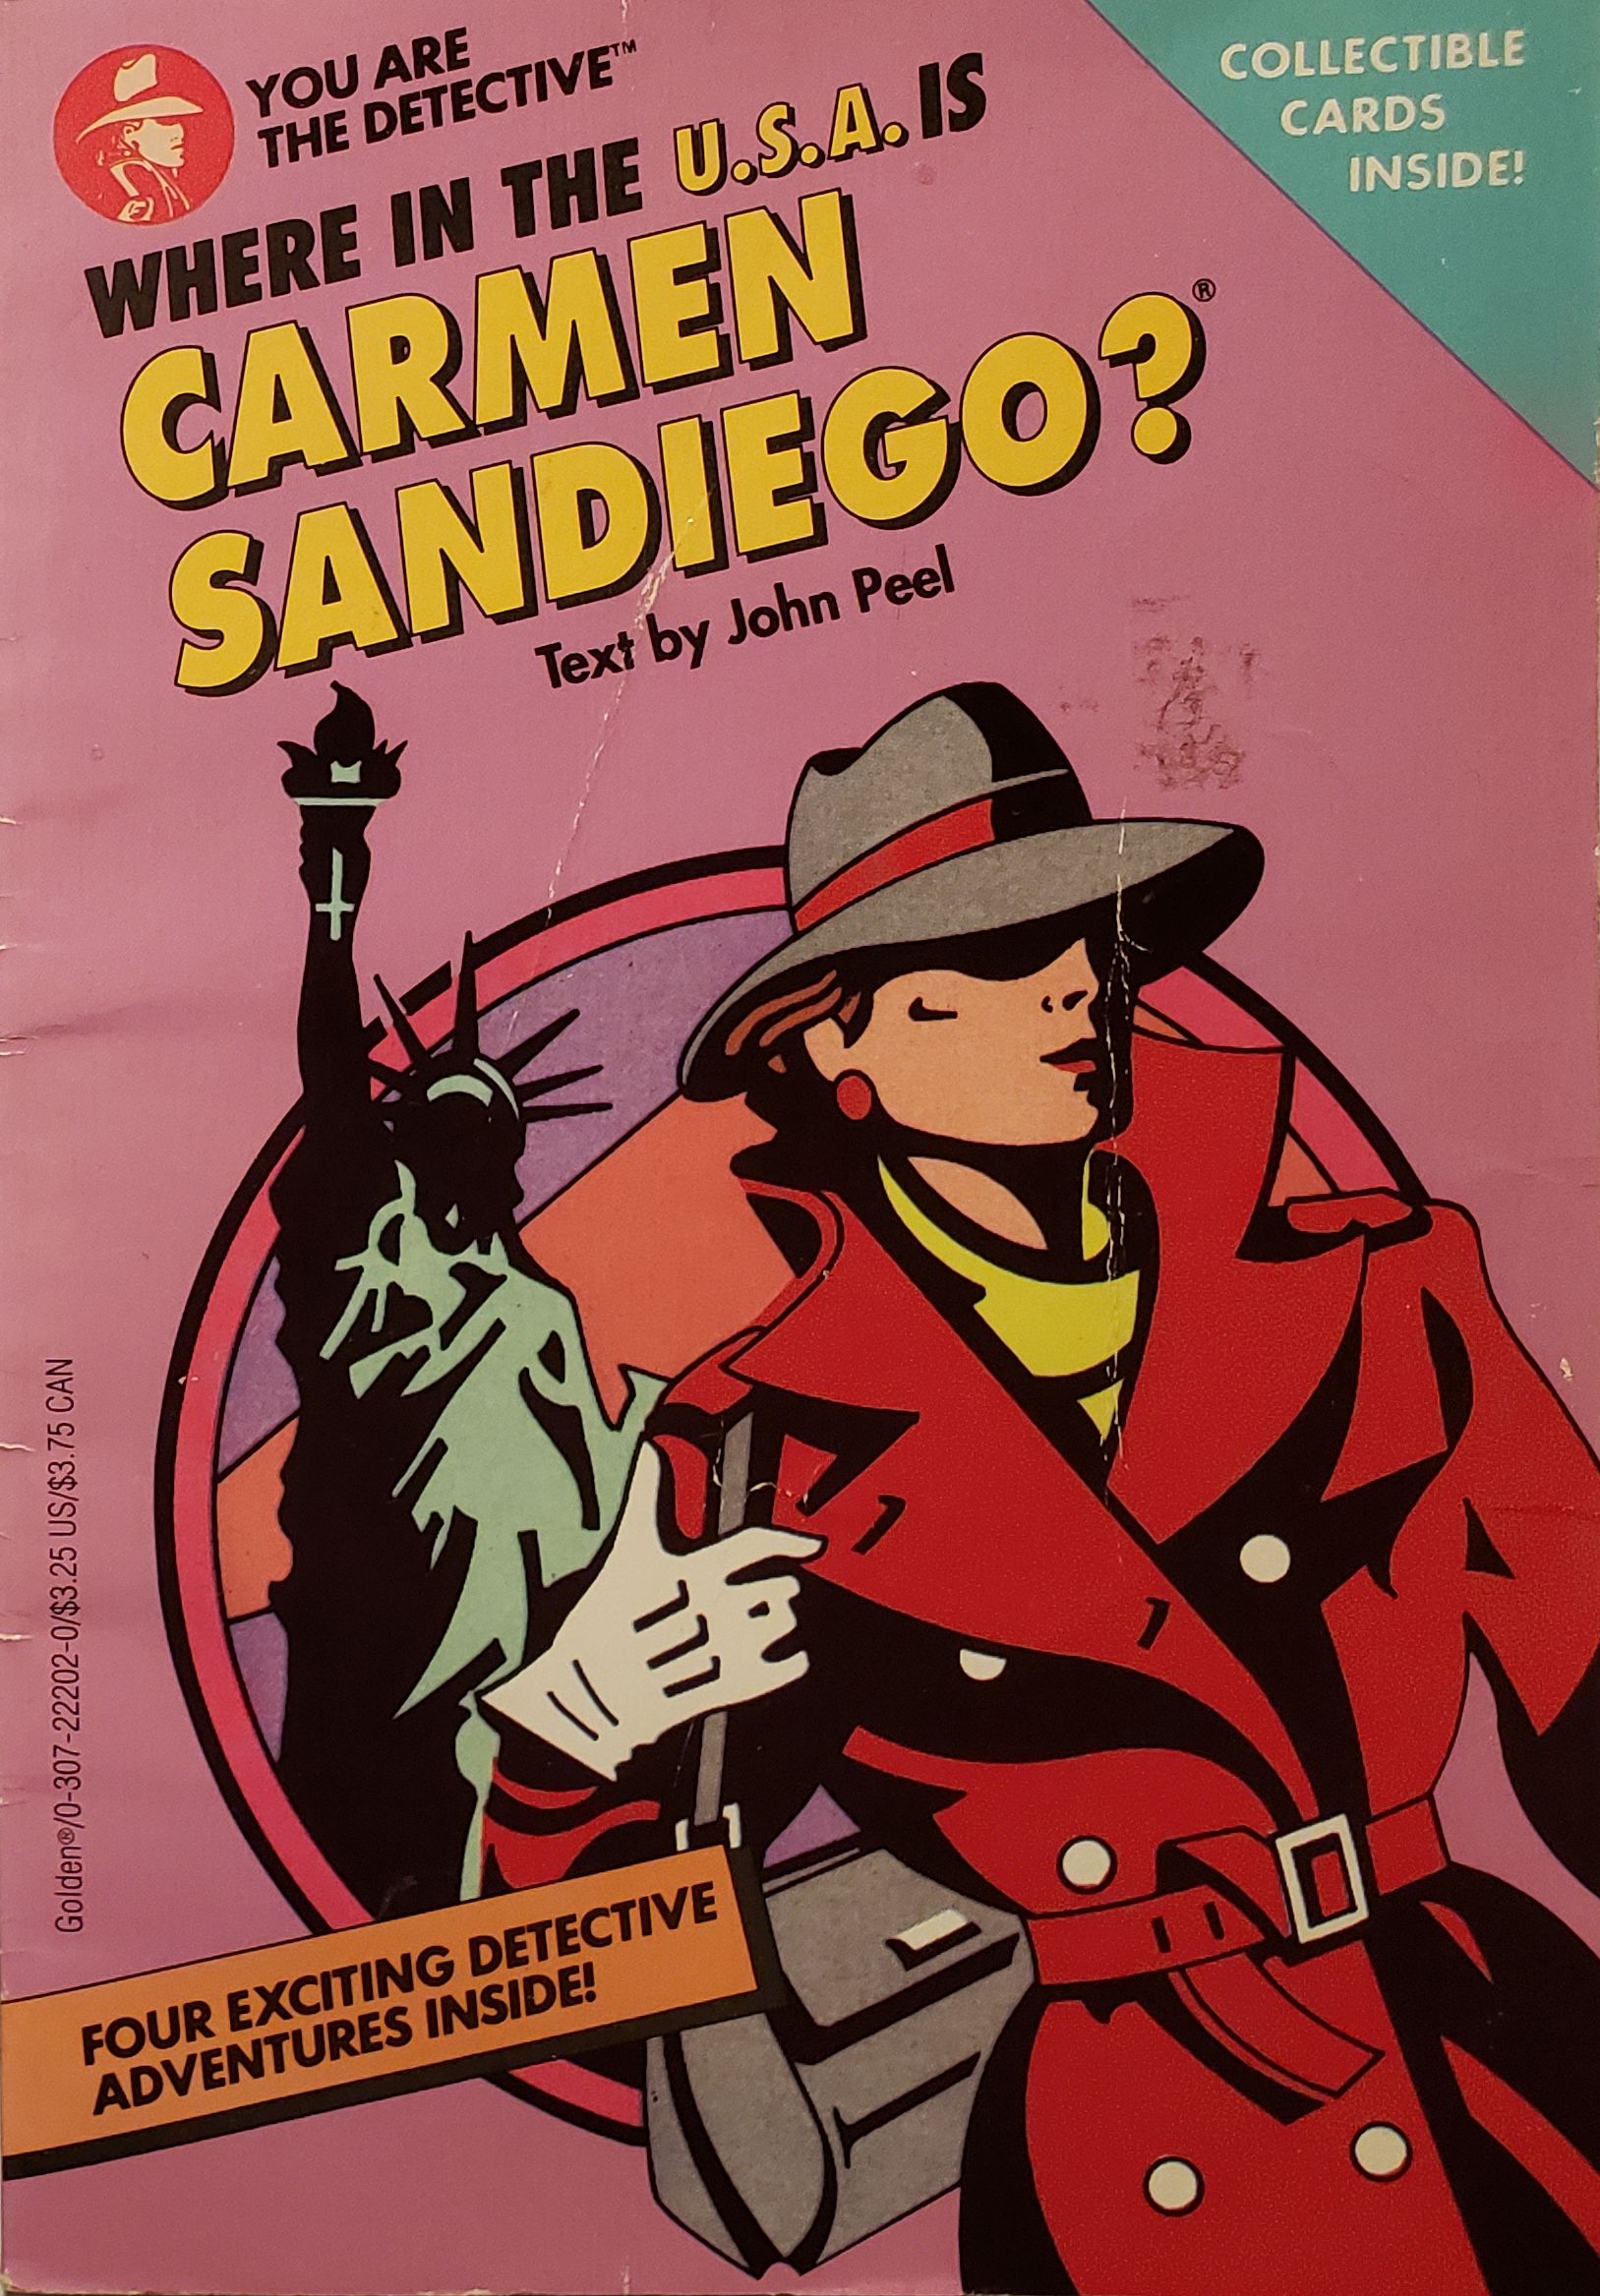 Where in the USA is Carmen Sandiego? - PC